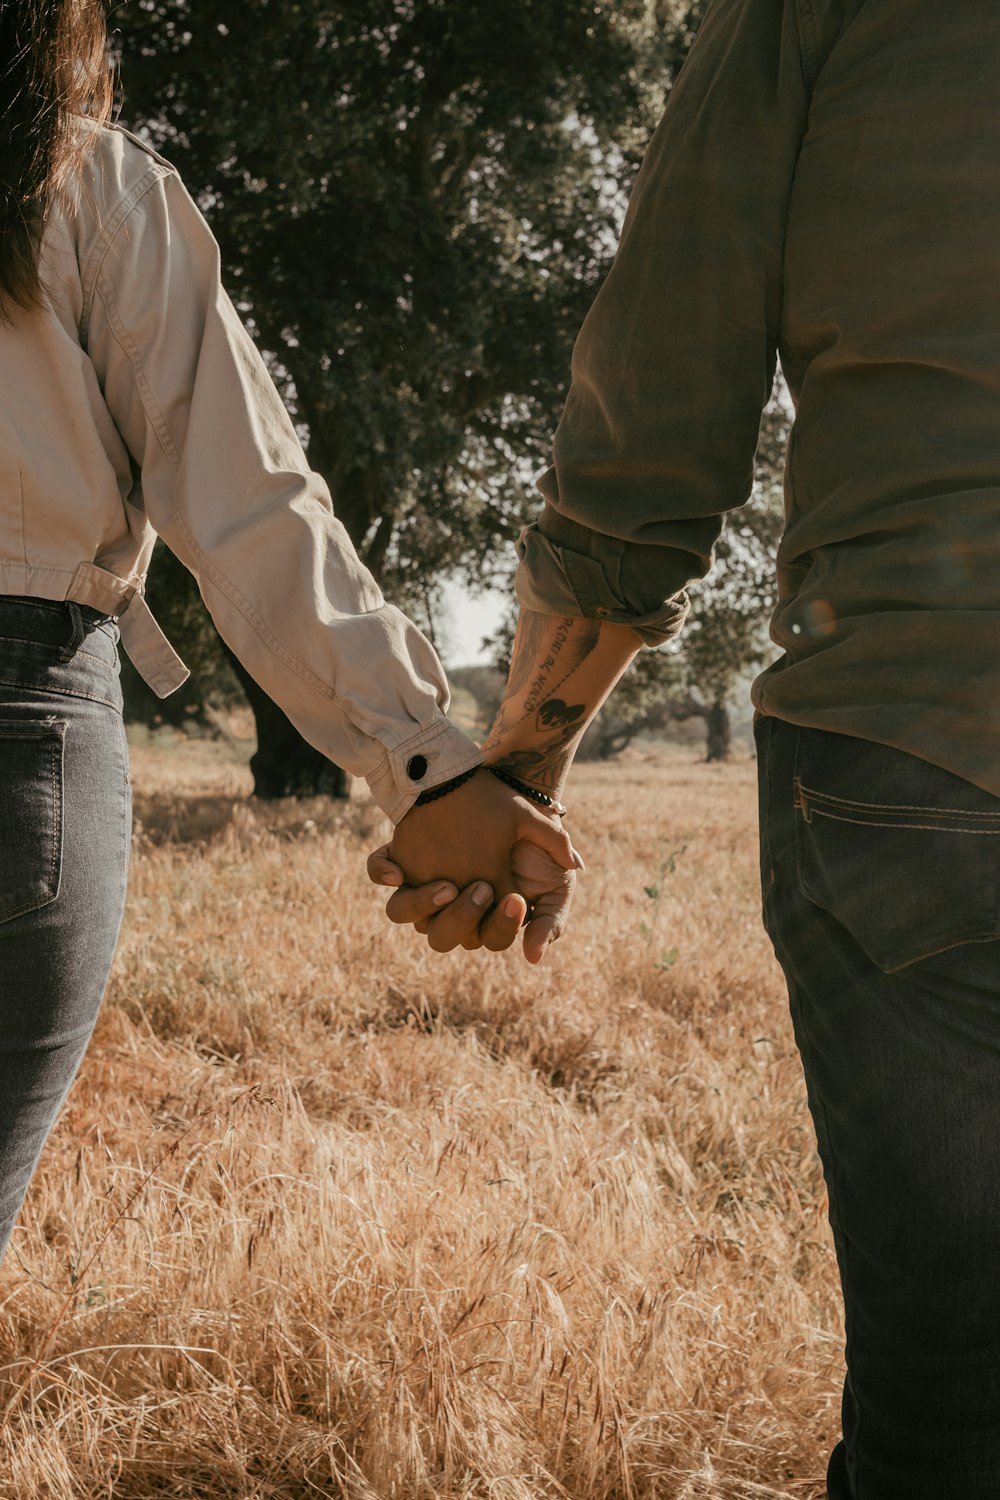 a man and a woman holding hands in a field